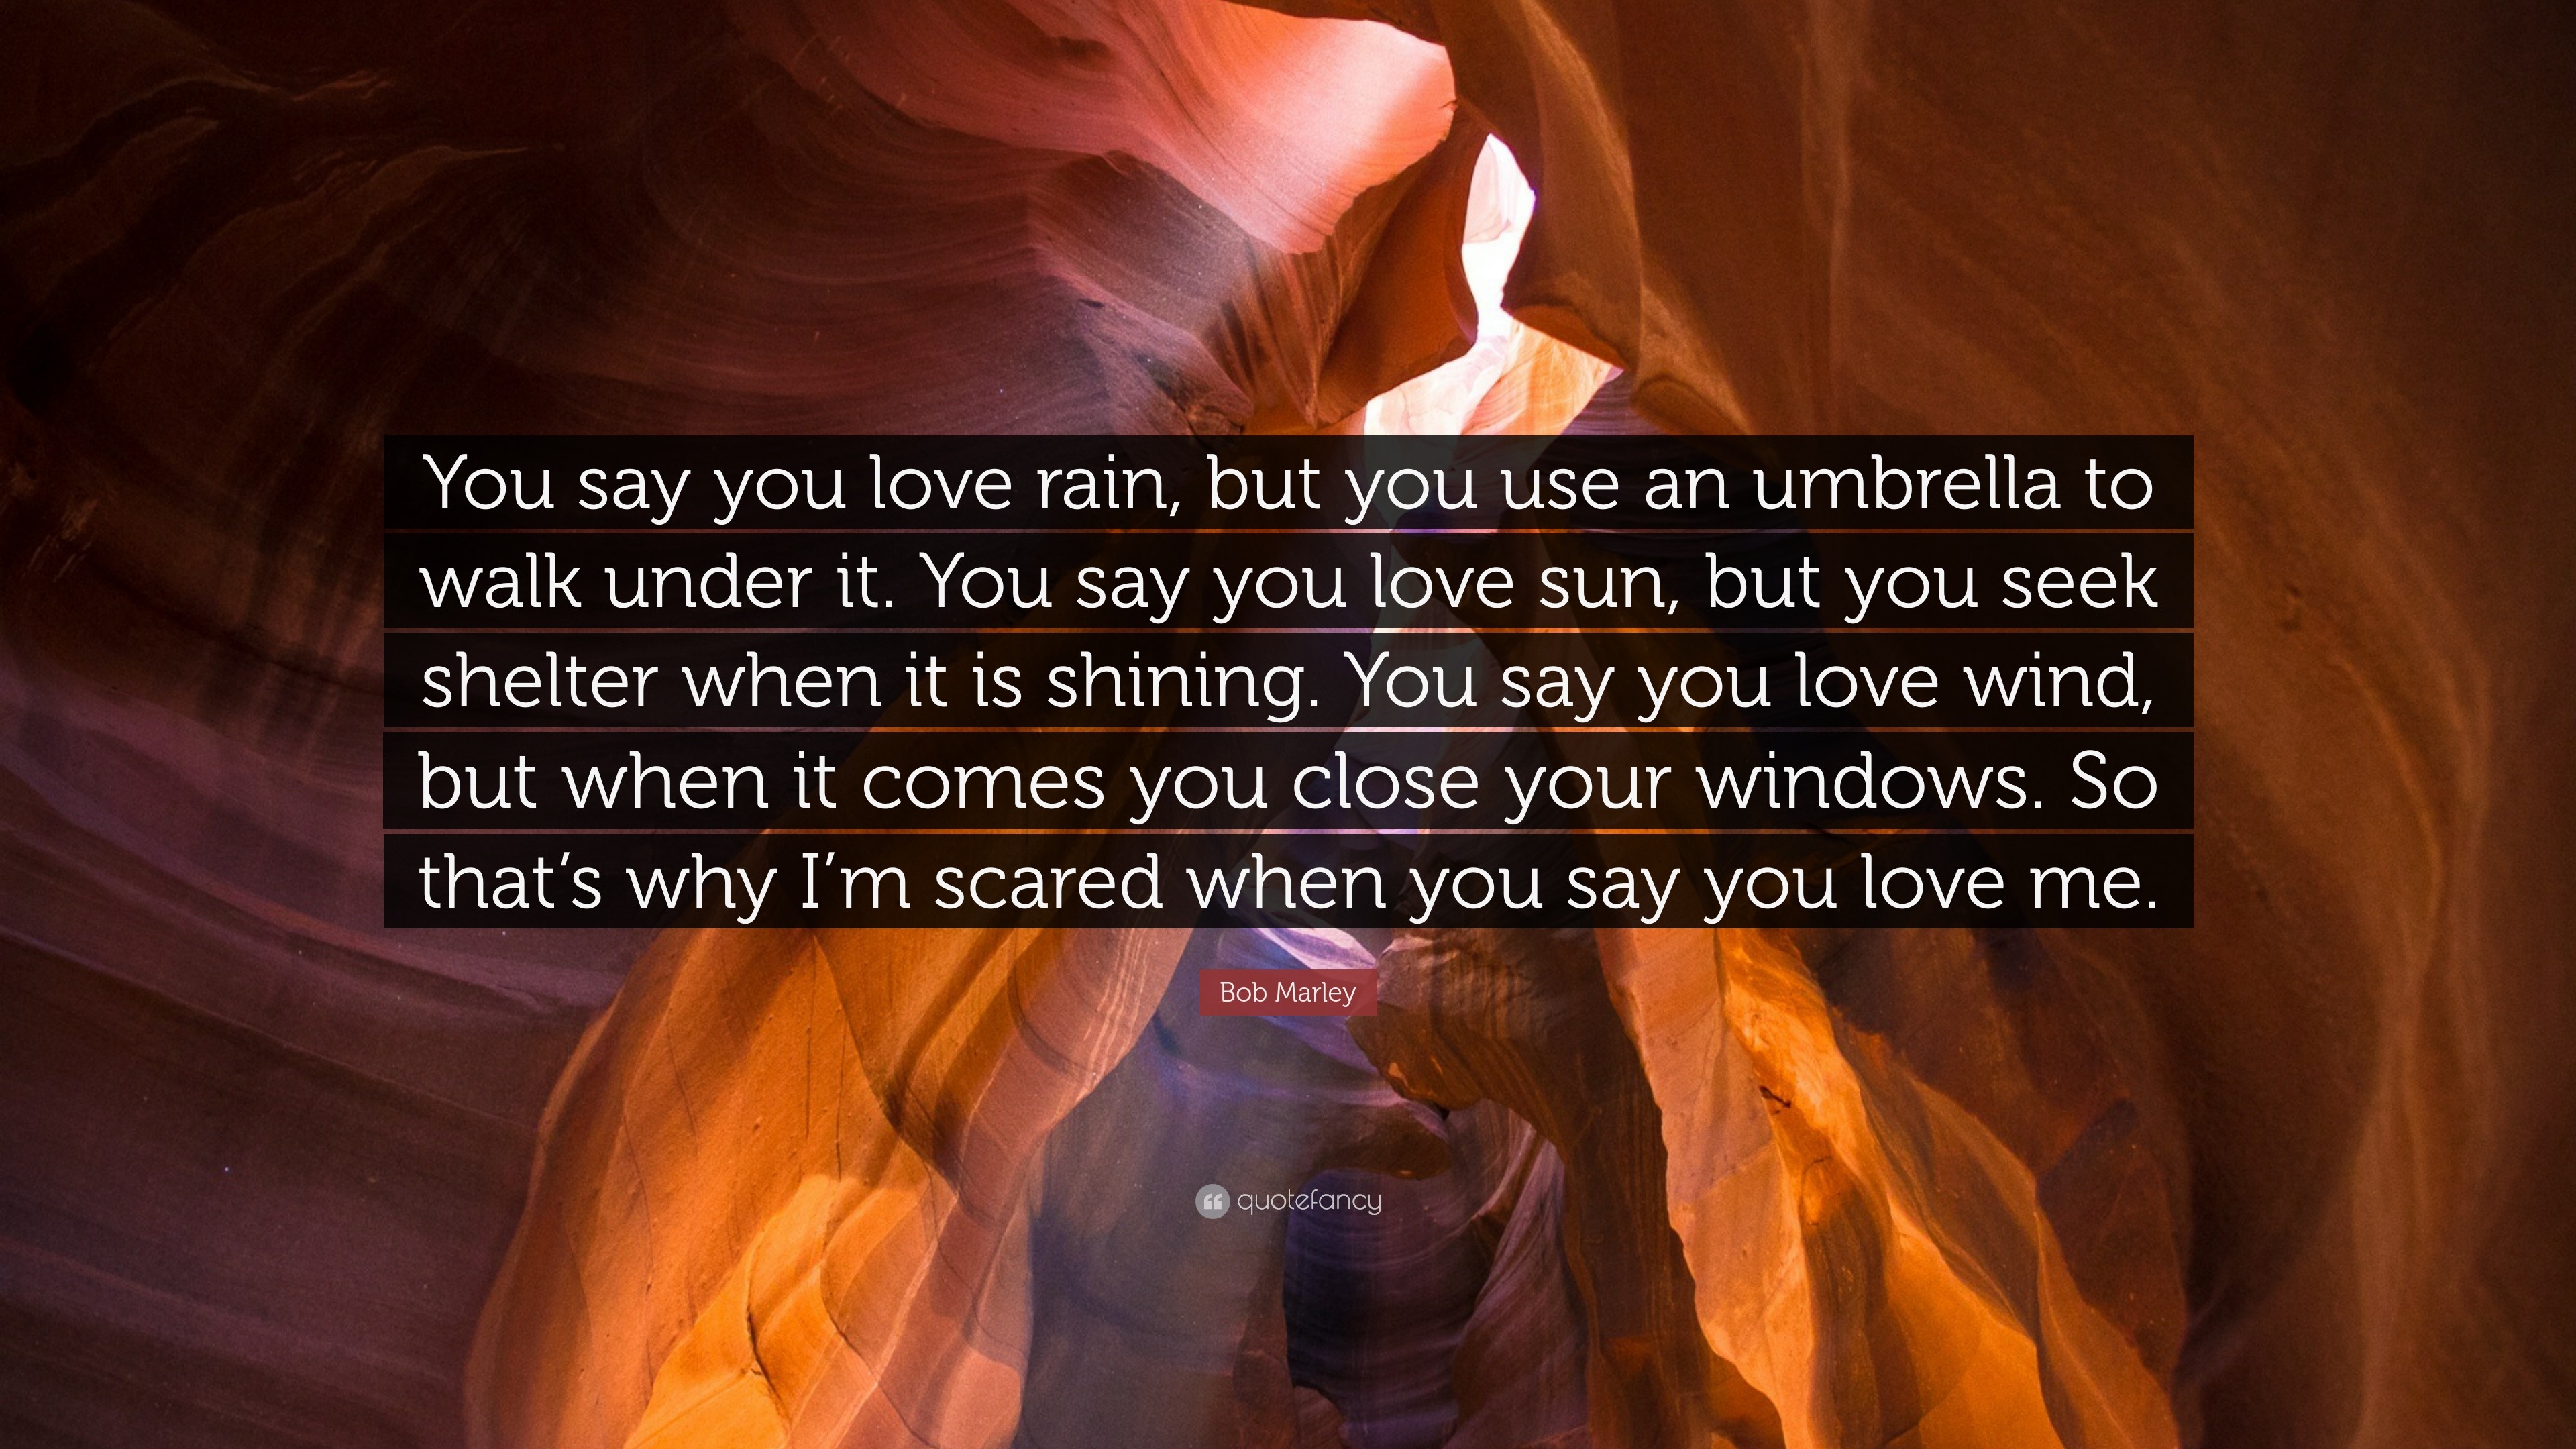 Bob Marley Quote “You say you love rain but you use an umbrella